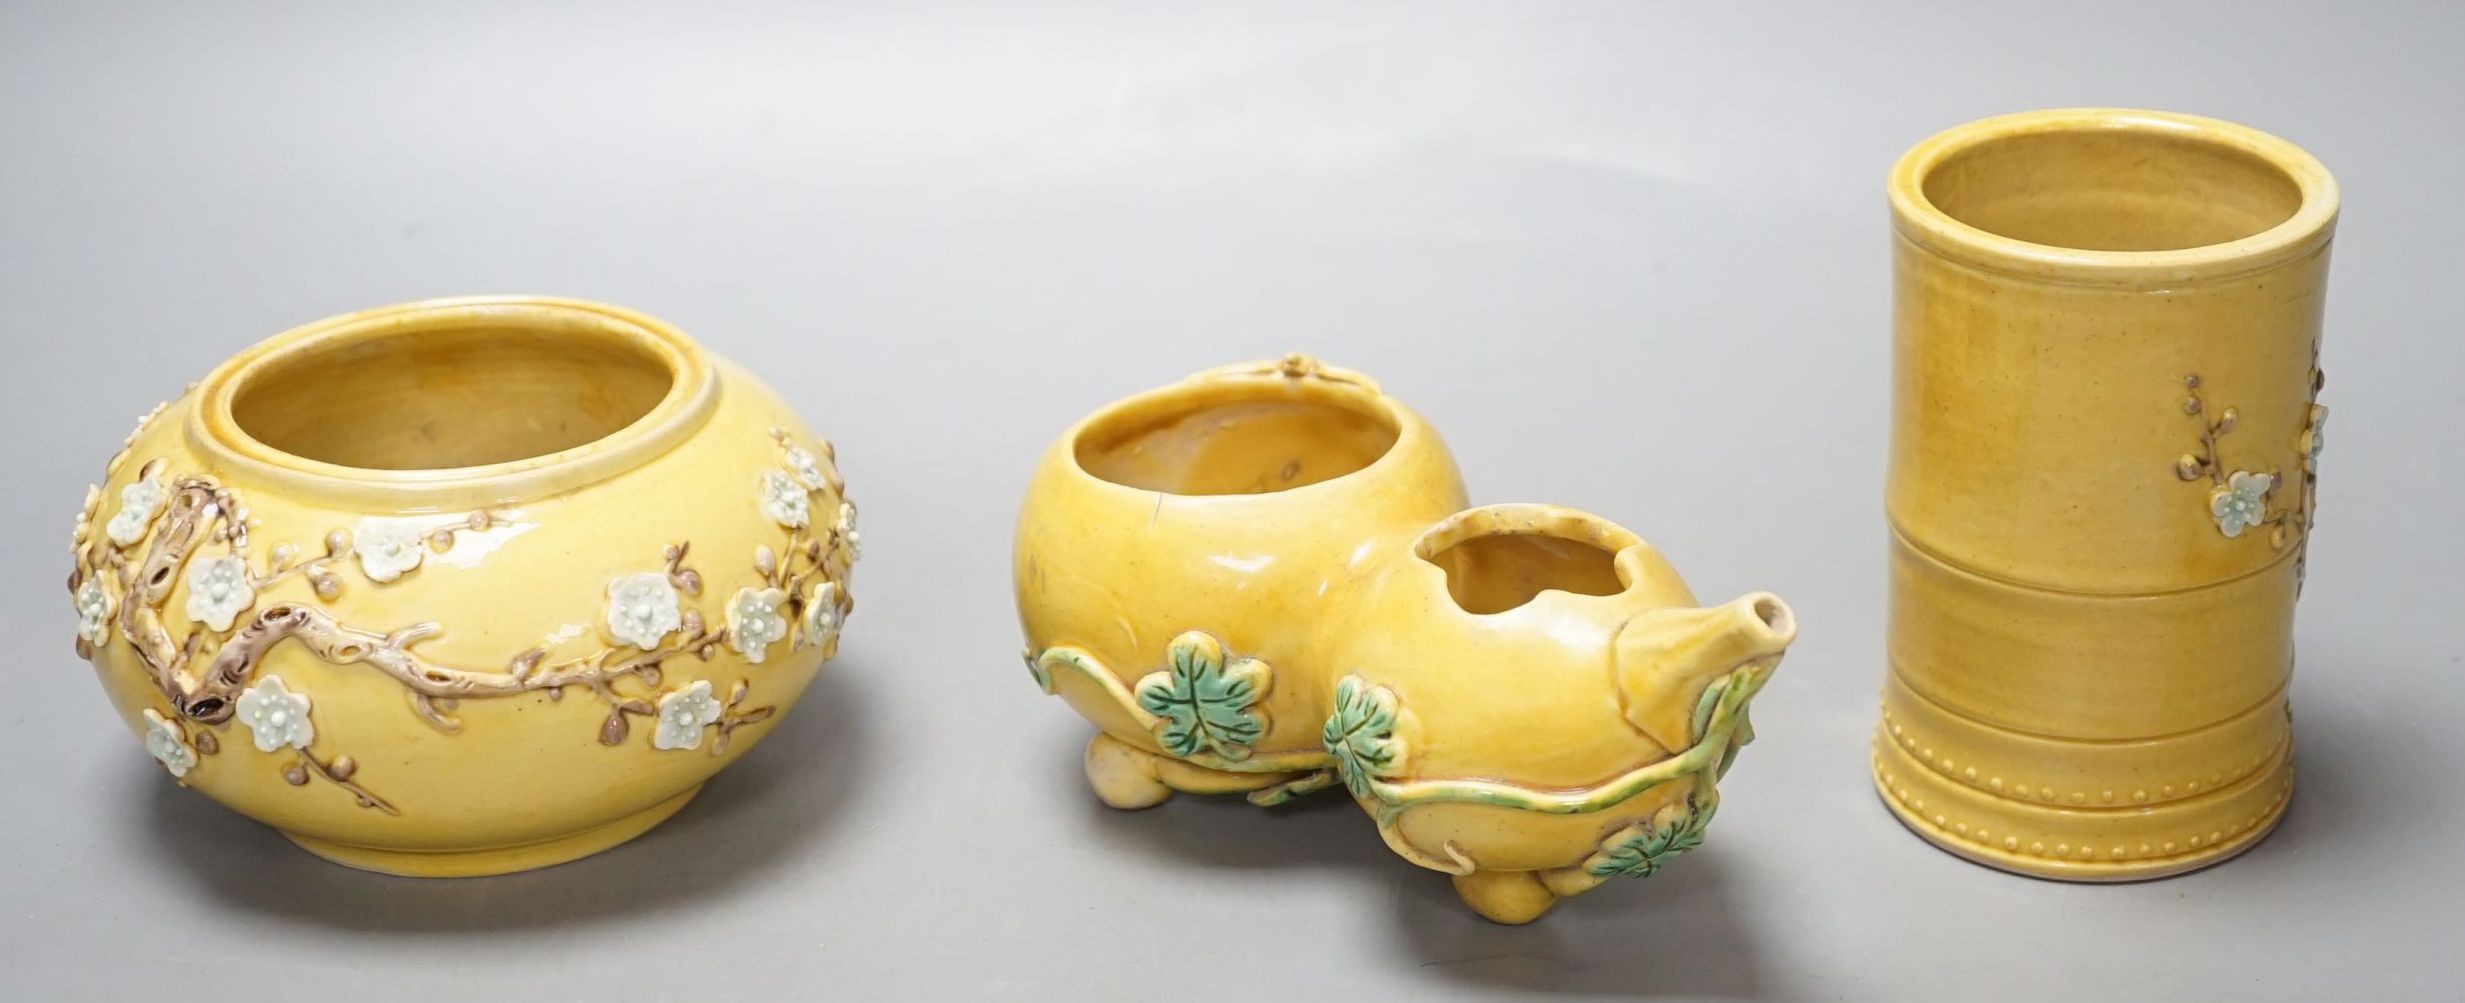 A Chinese yellow coloured biscuit porcelain three piece scholar's set, Republic period, brushpot 10 cm high